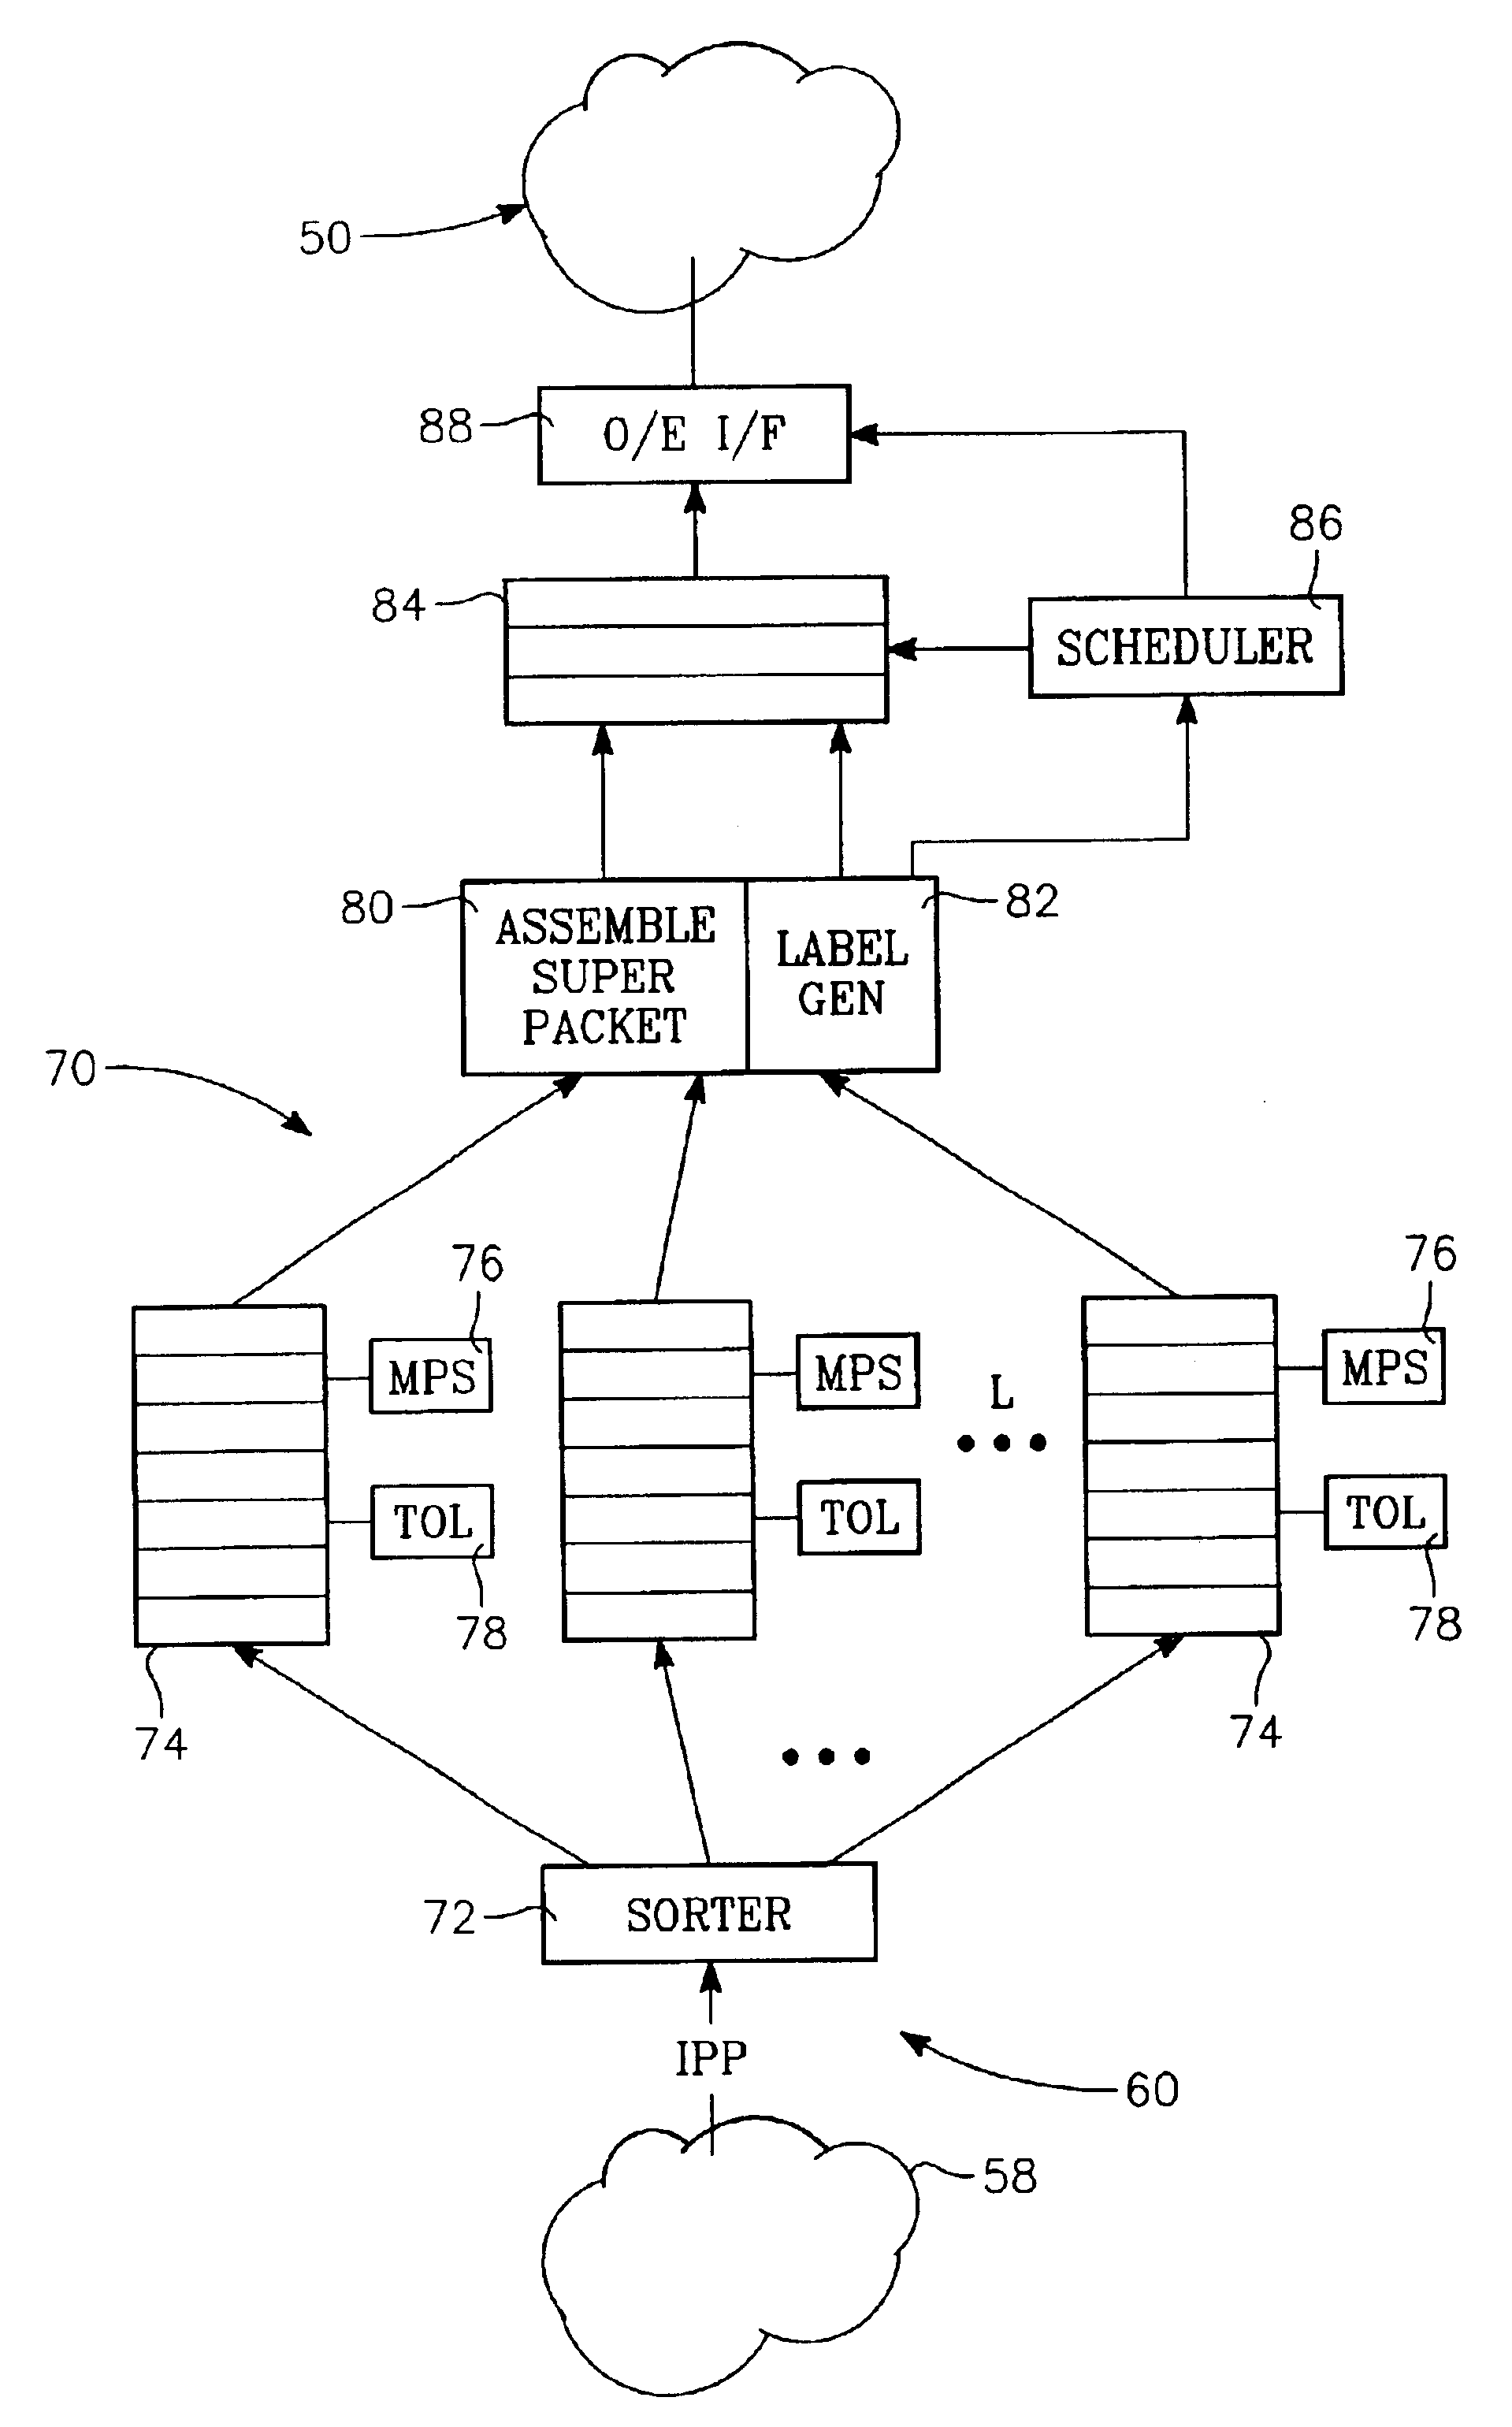 Edge router for optical label switched network